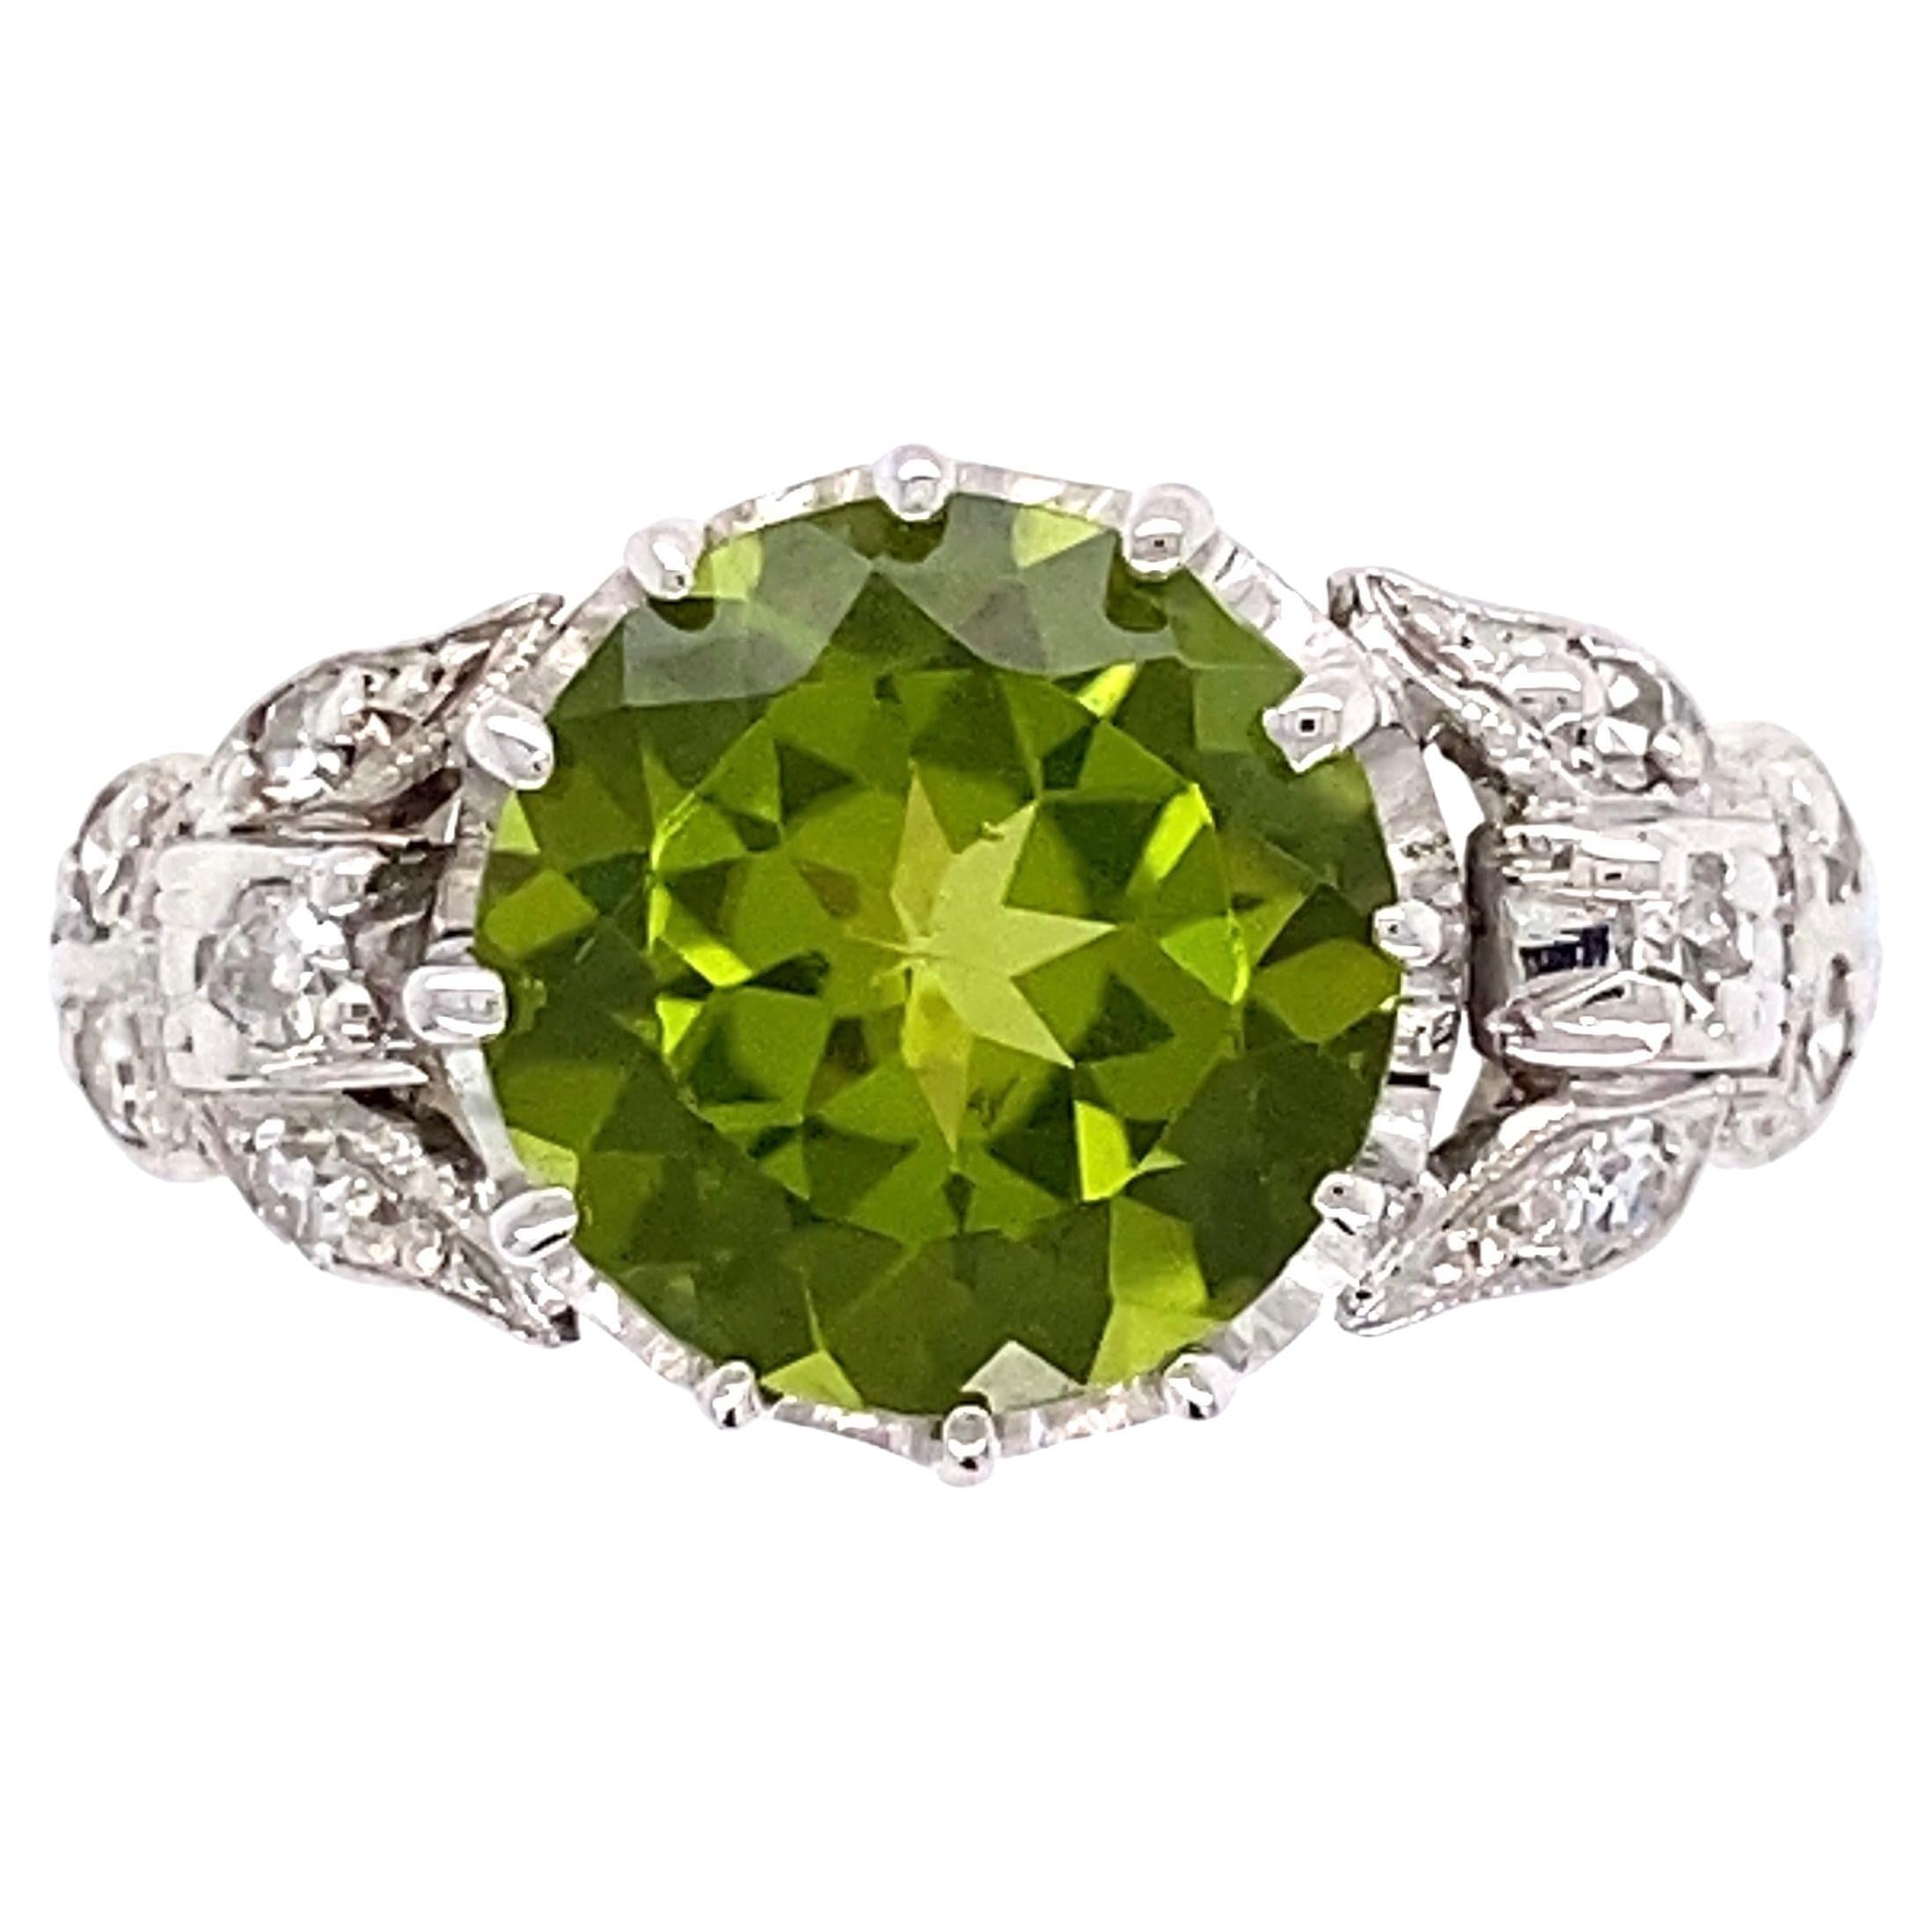 2.54 Carat Peridot and Diamond Art Deco Revival Solitaire Platinum Ring For Sale